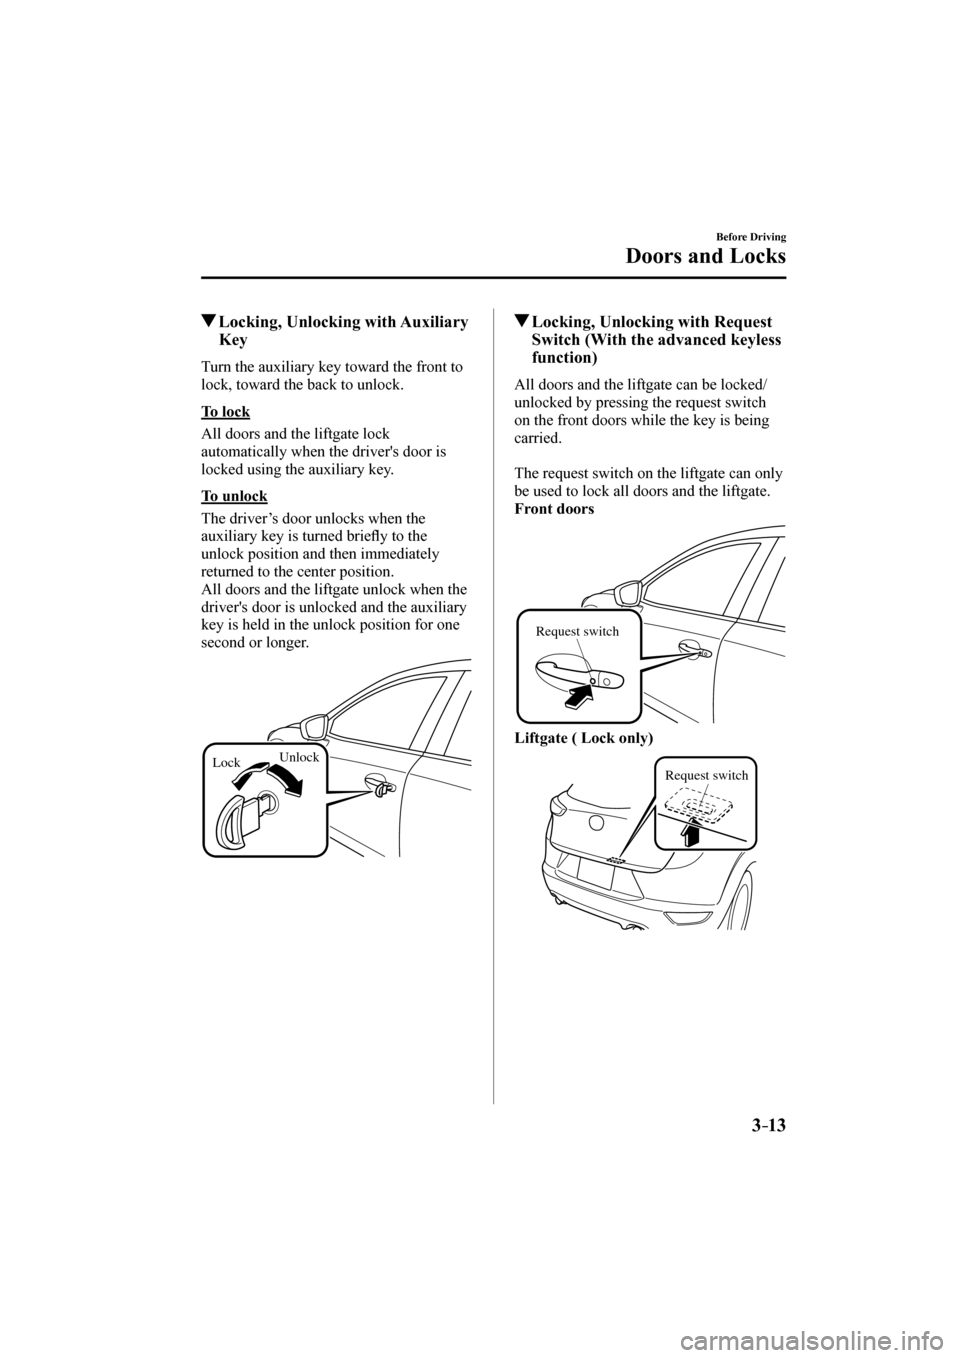 MAZDA MODEL CX-3 2017  Owners Manual (in English) 3–13
Before Driving
Doors and Locks
         Locking, Unlocking with Auxiliary 
Key
    Turn the auxiliary key toward the front to 
lock, toward the back to unlock.
  To  lock
    All doors and the 